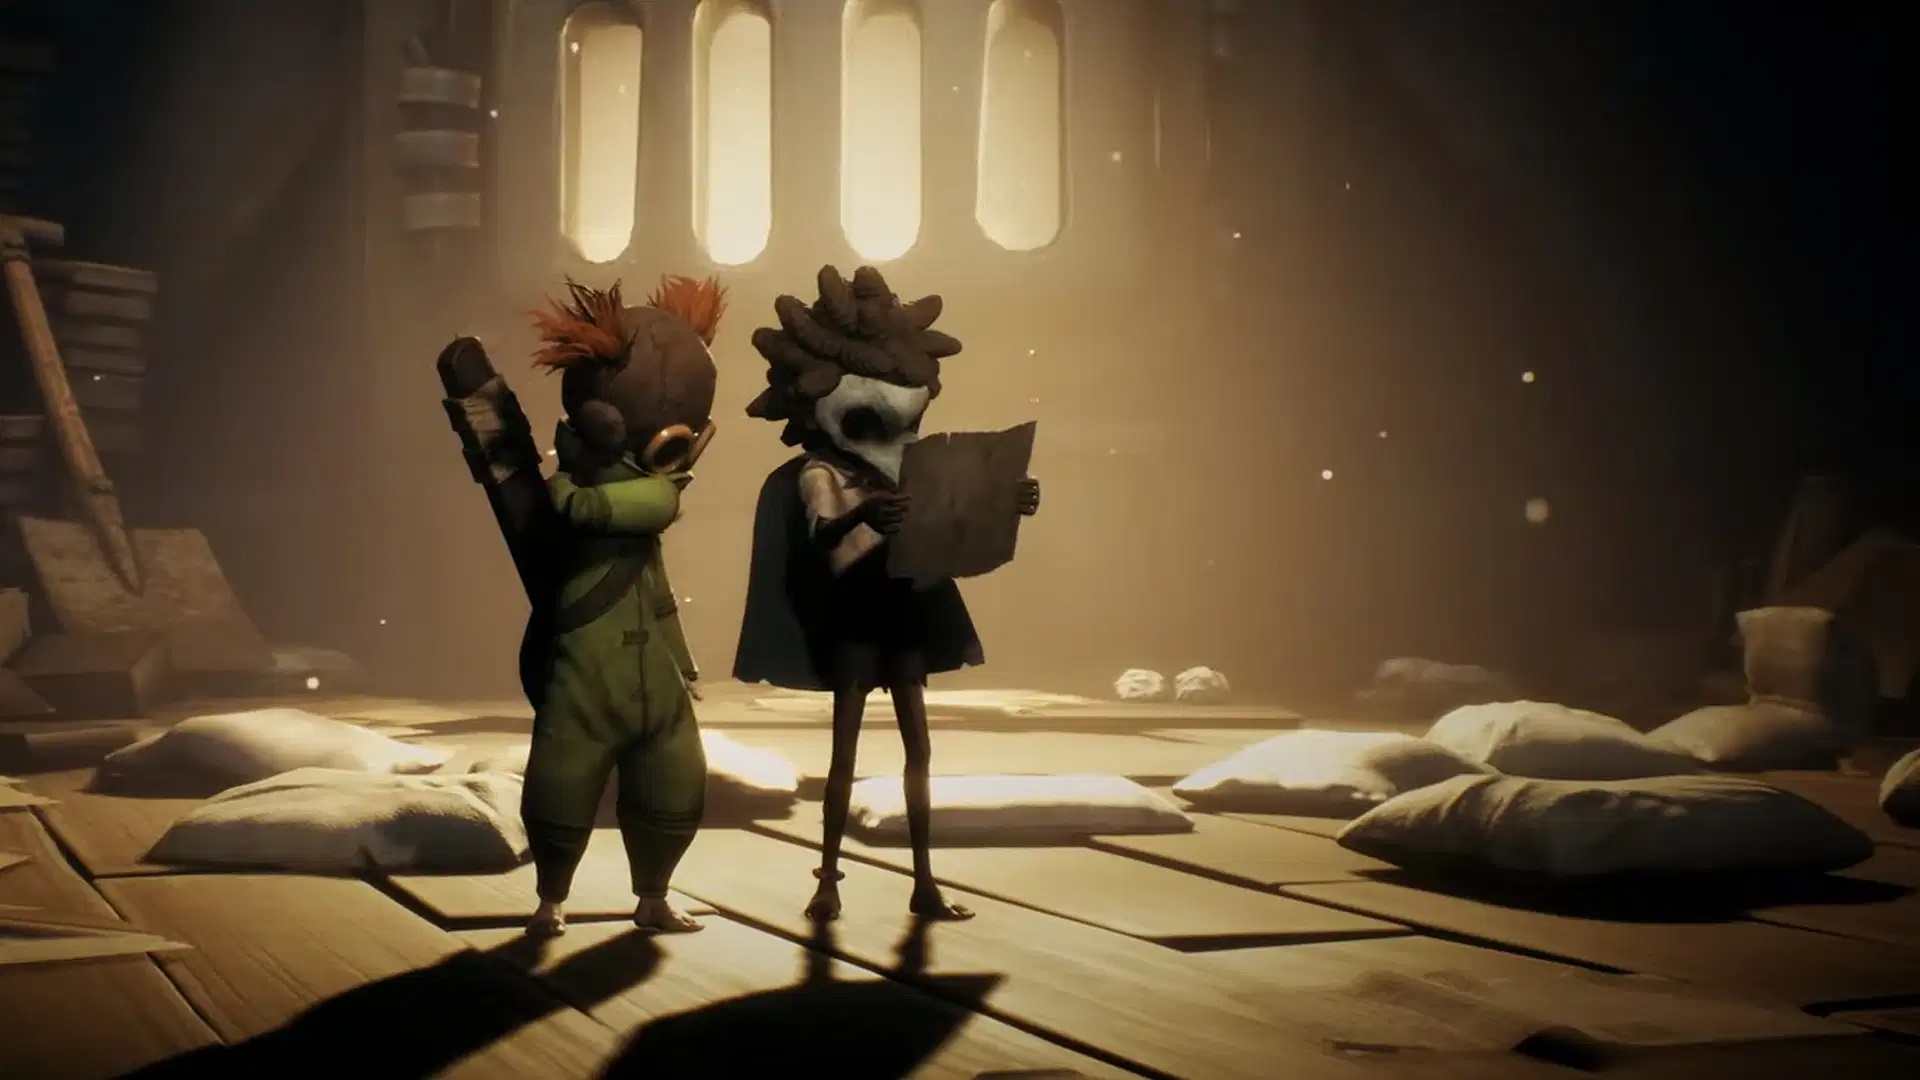 Little Nightmares 3 is coming in 2024, developed by Supermassive Games